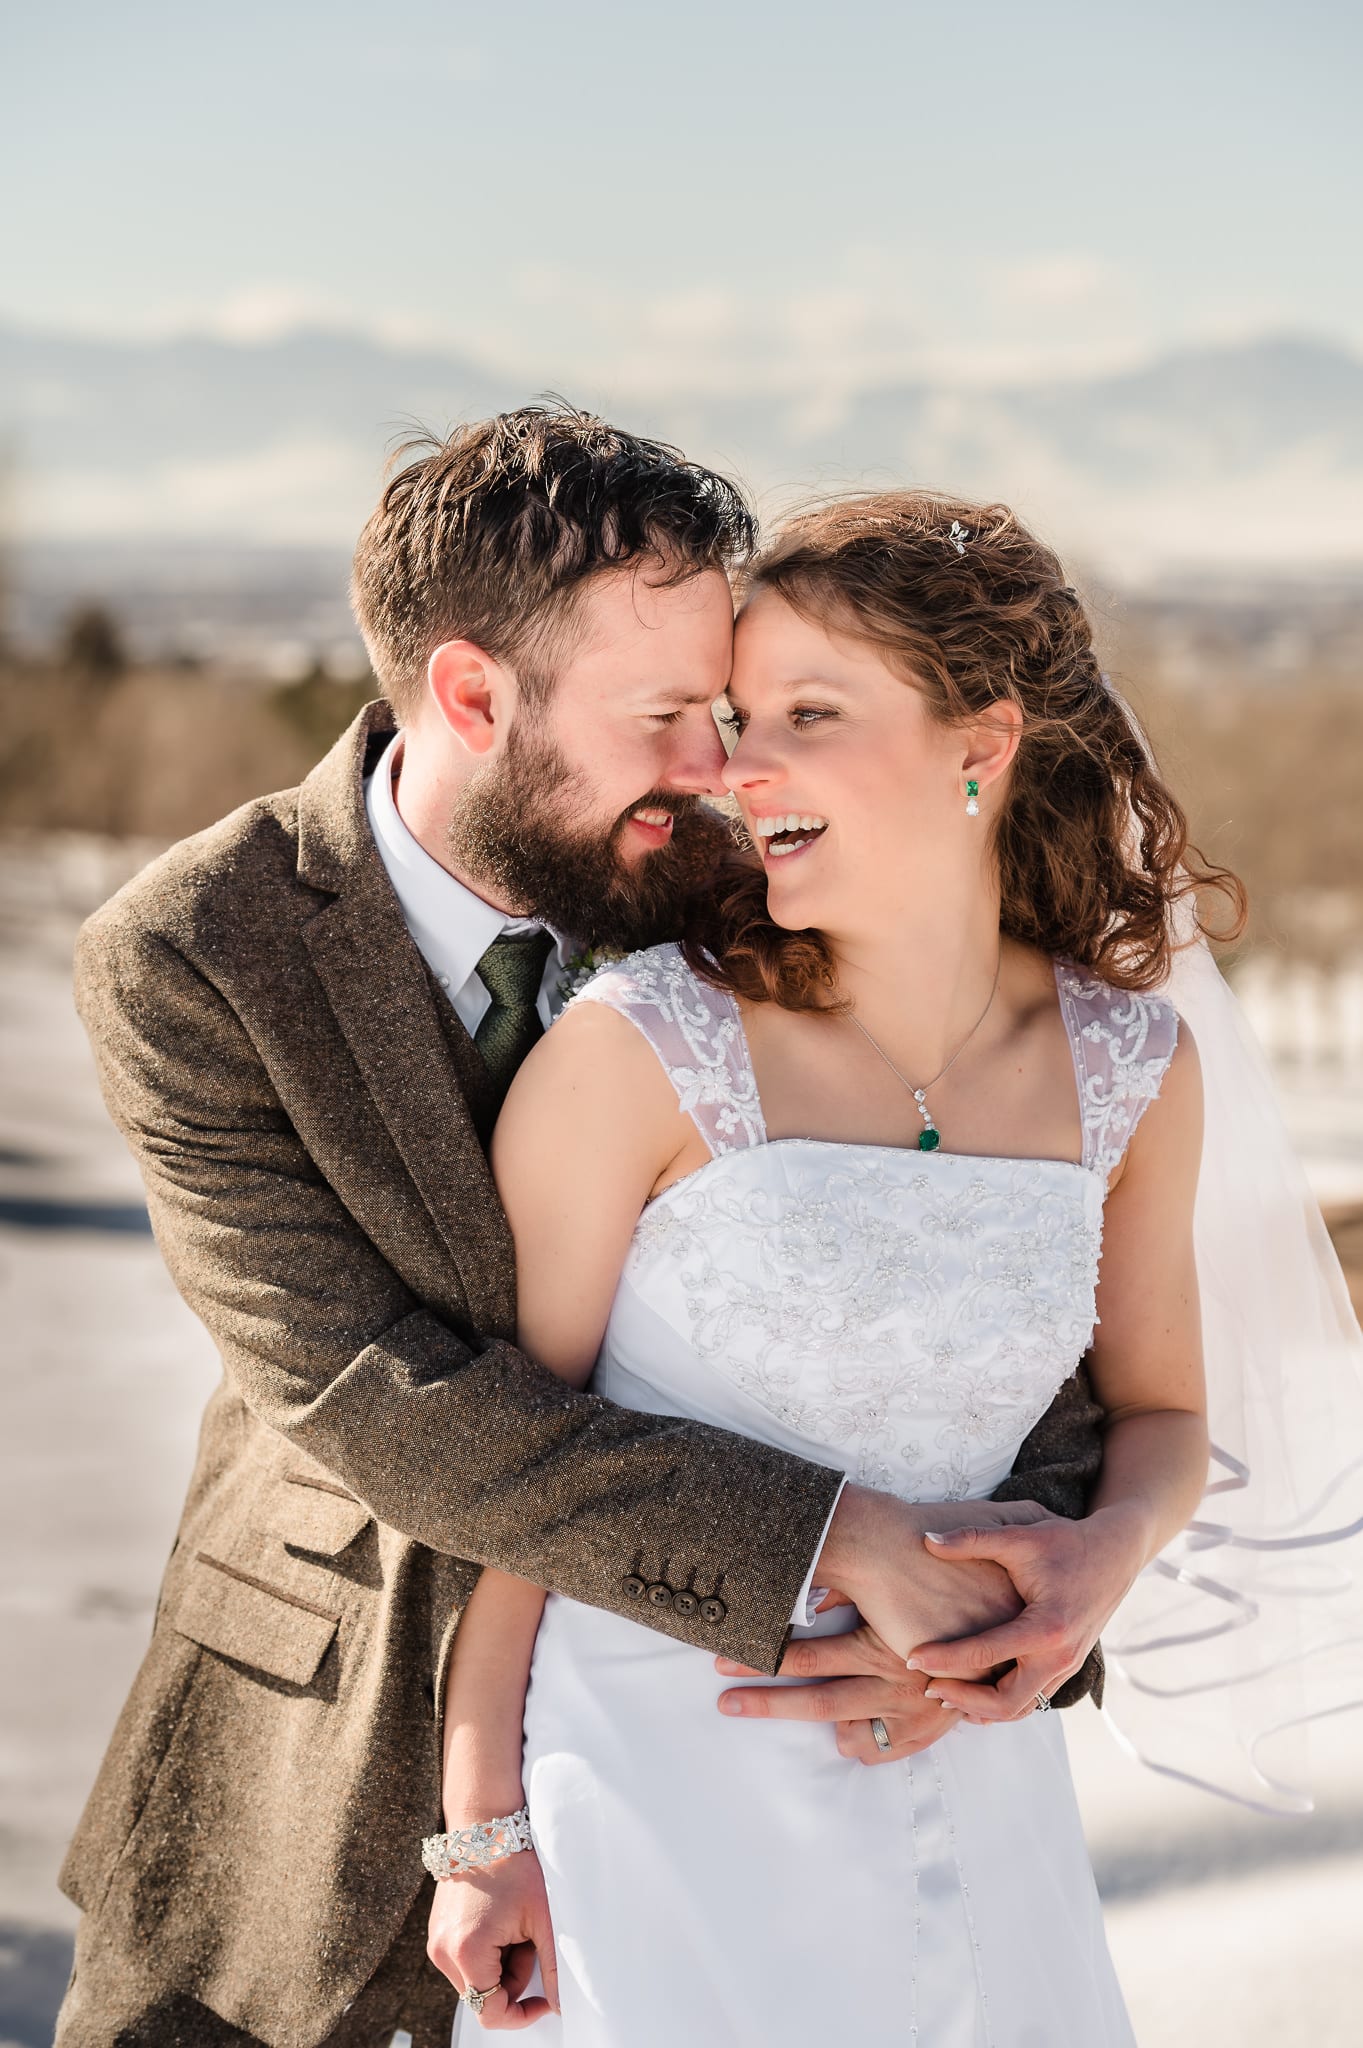 A bride and groom playfully touch noses during their photo session in the winter snow.